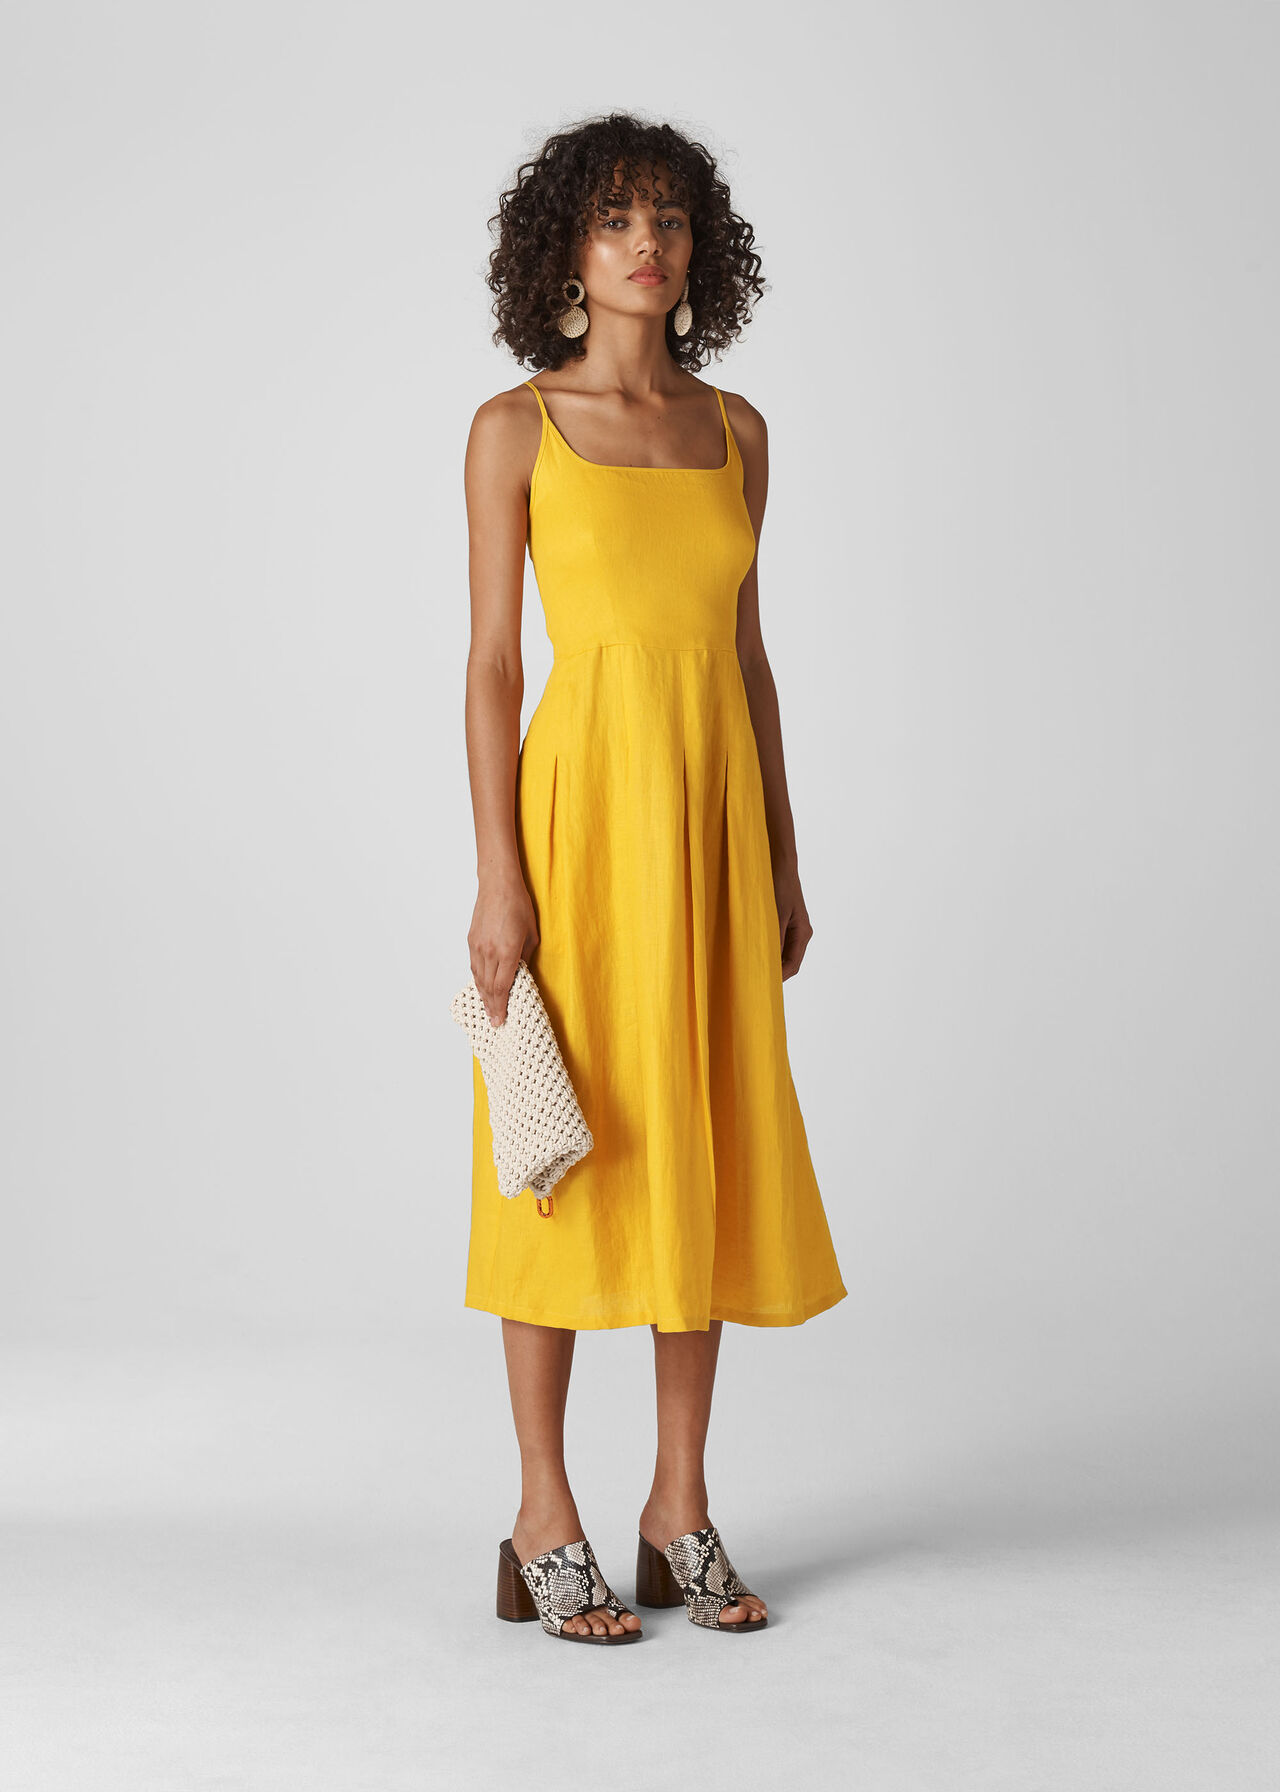 Yellow Duffy Strappy Dress | WHISTLES | Whistles